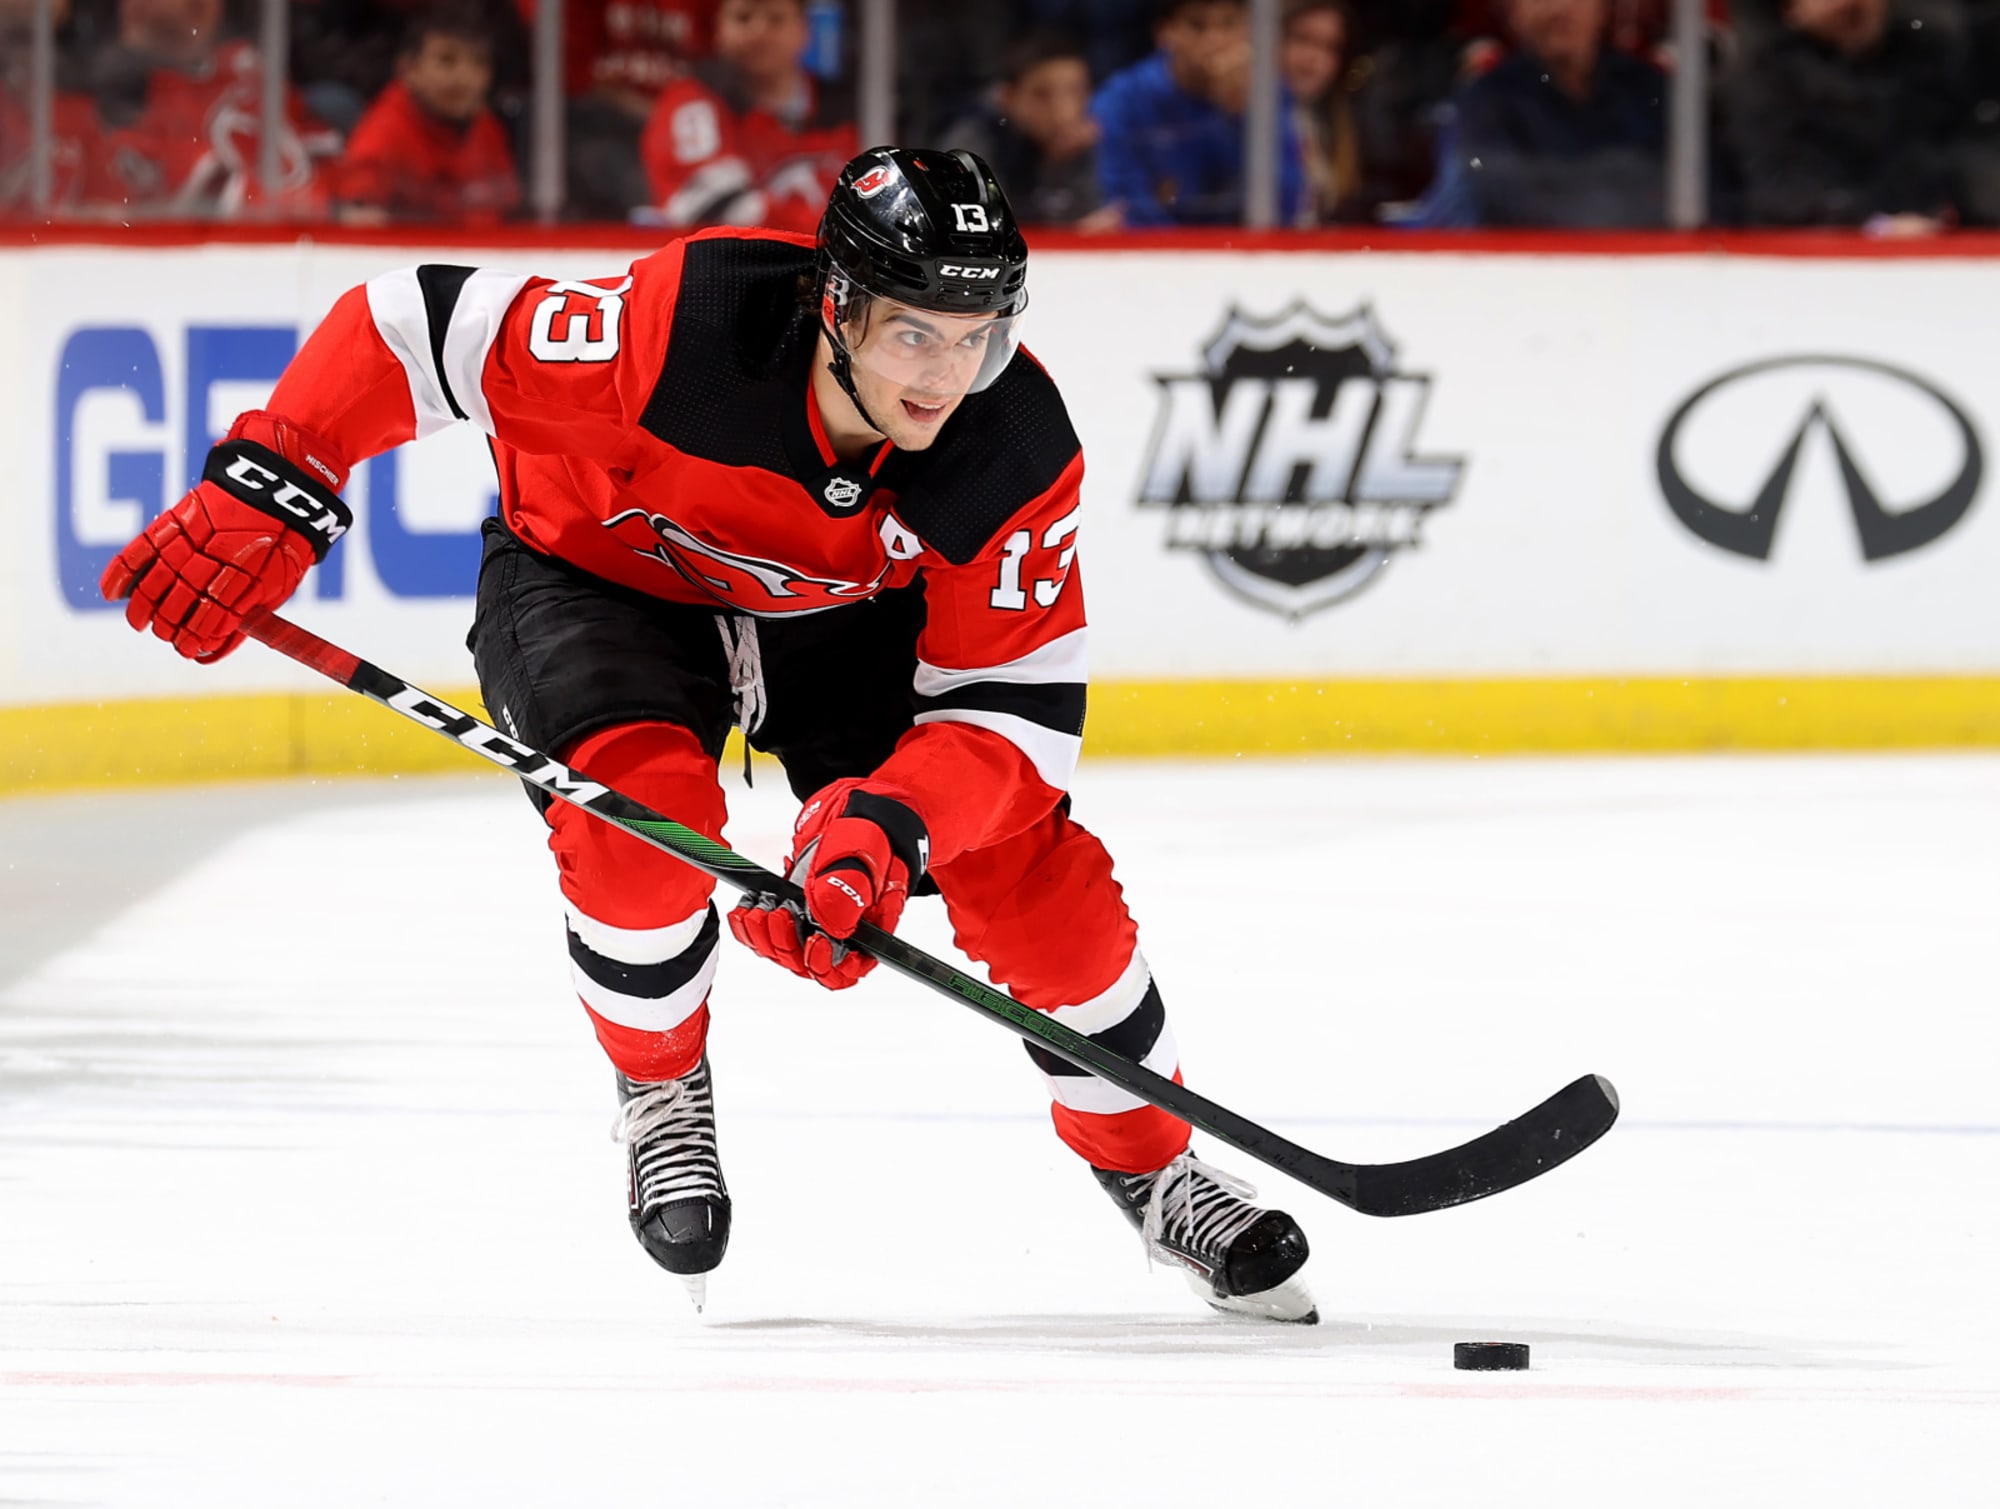 Name a player who has played for New Jersey Devils and Edmonton Oilers -  News